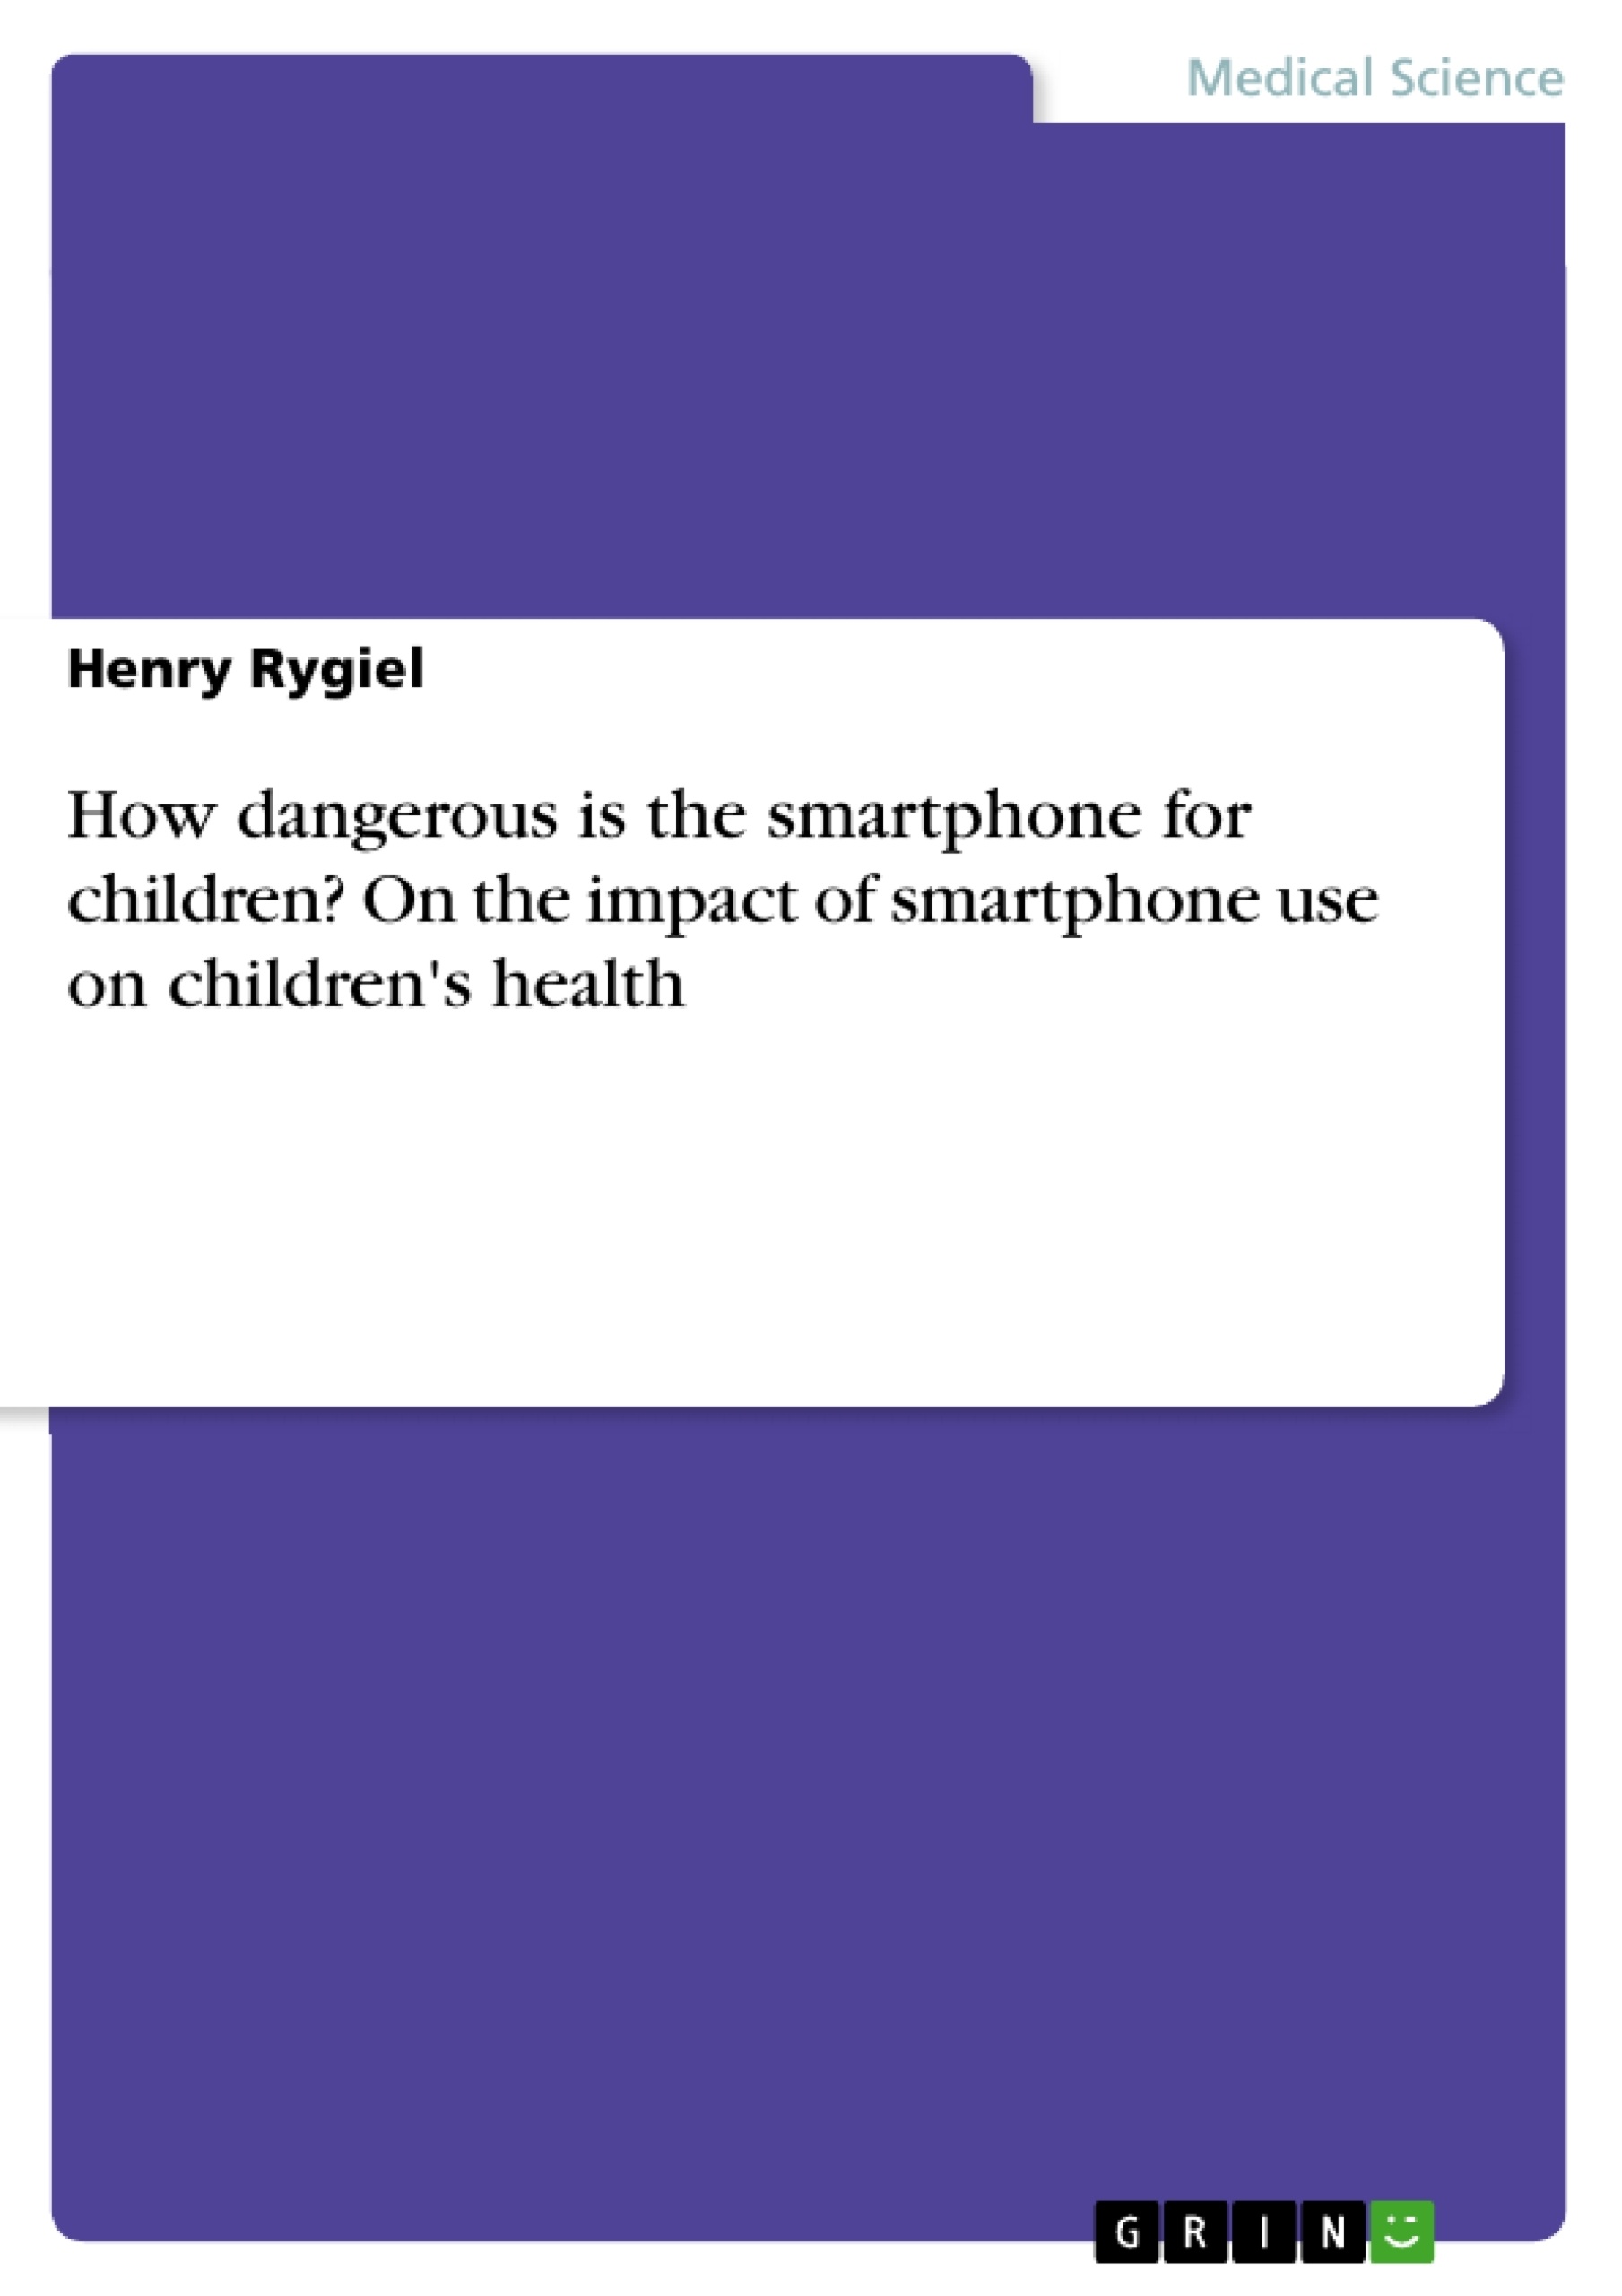 Title: How dangerous is the smartphone for children? On the impact of smartphone use on children's health